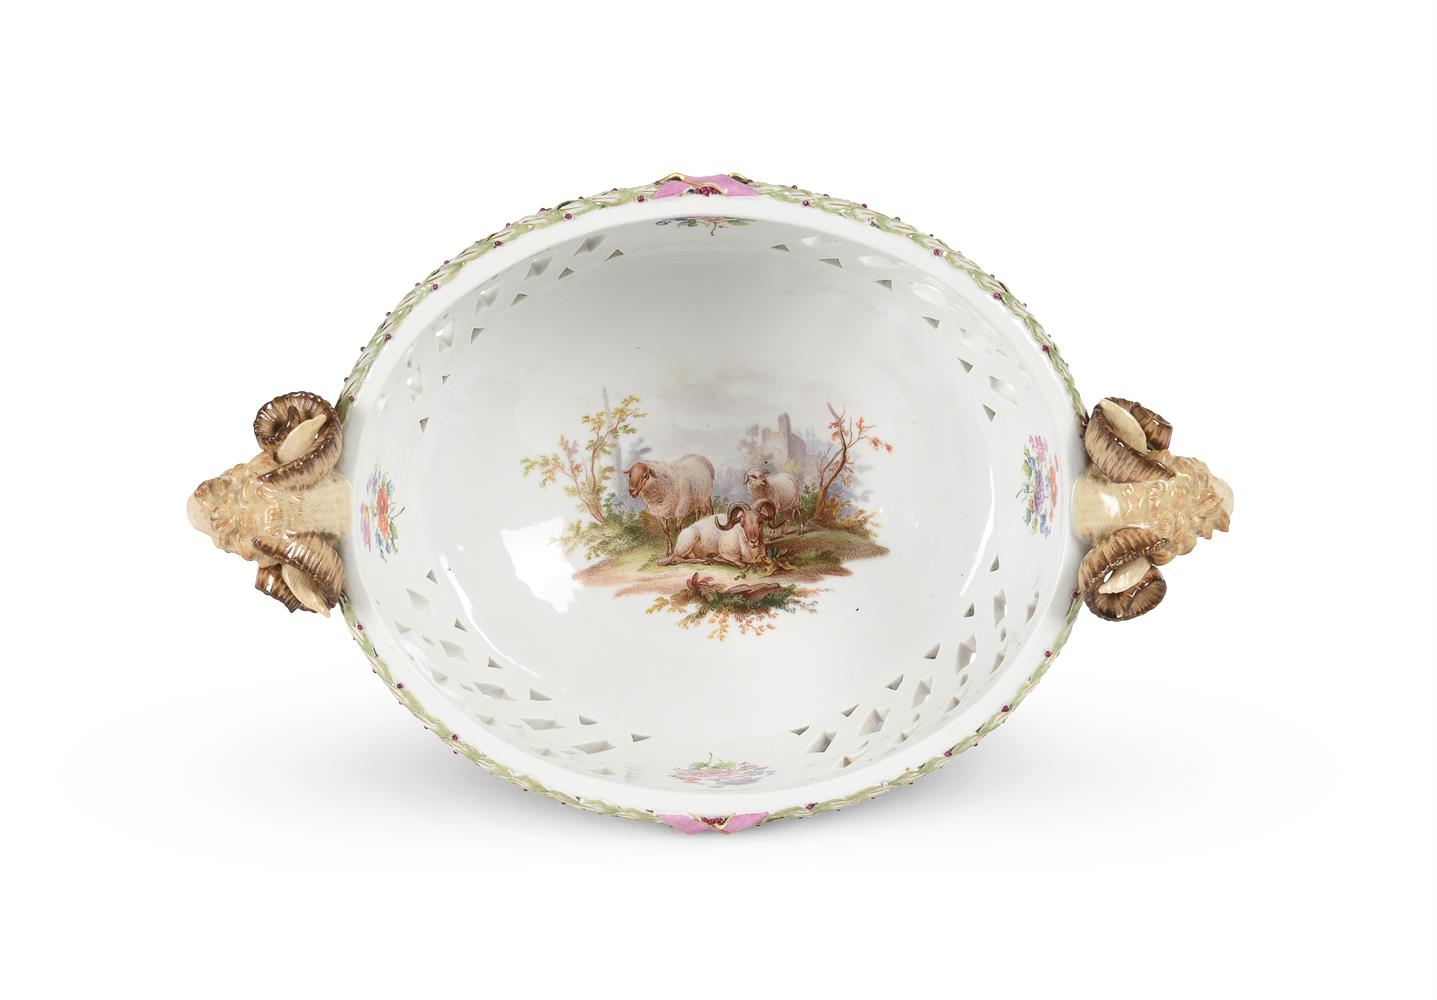 A MEISSEN PORCELAIN TWO-HANDLED PIERCED CENTRE BASKET, LATE 19TH CENTURY - Image 2 of 5